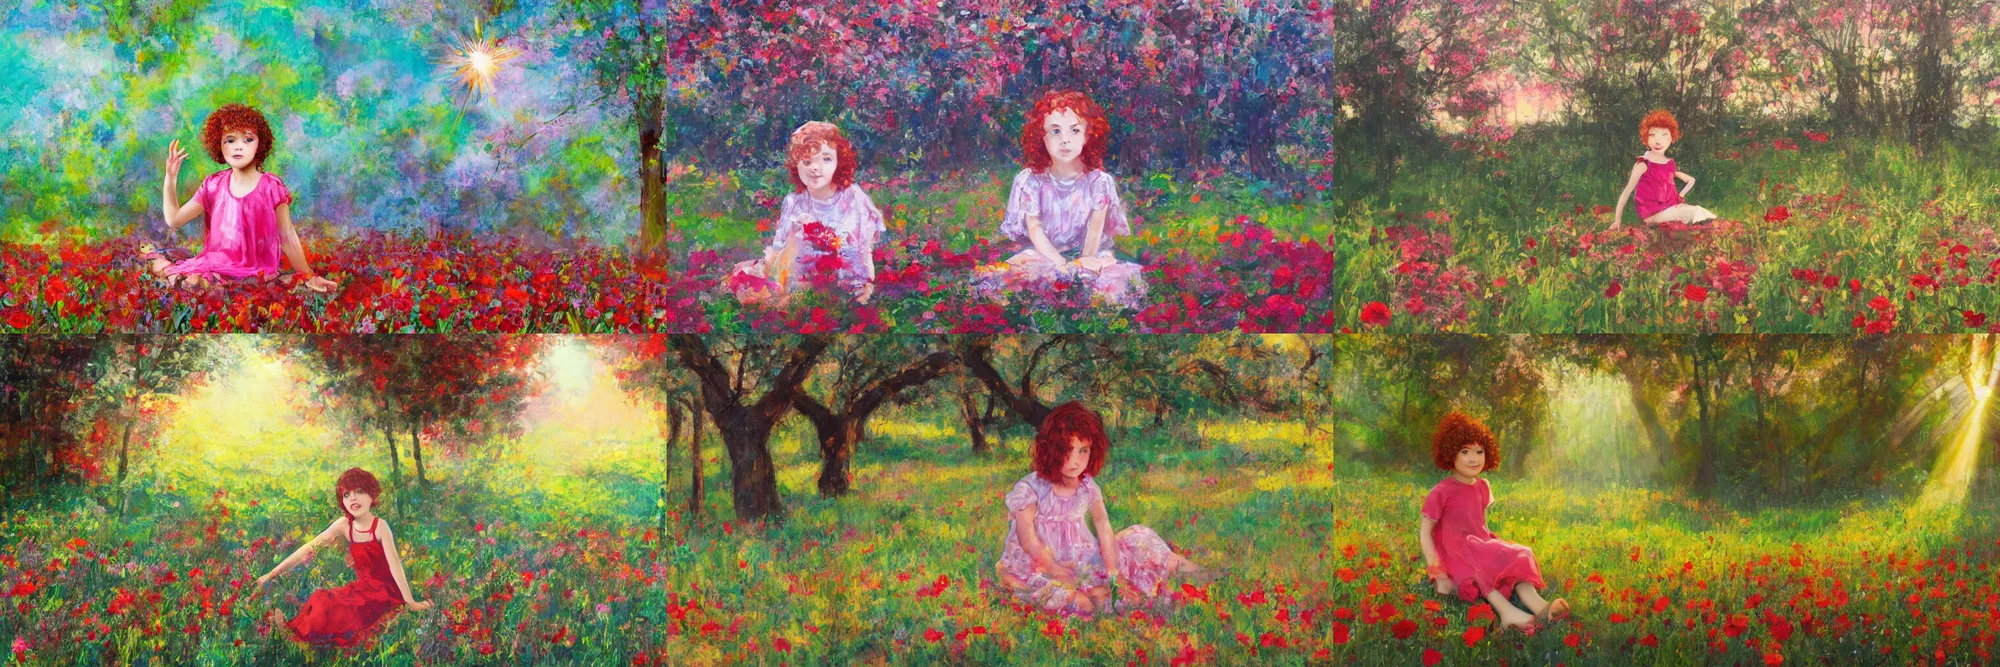 Prompt: a cute young girl with short curly red hair sitting in a field of flowers, god rays are passing through the trees in the background, abstract painting